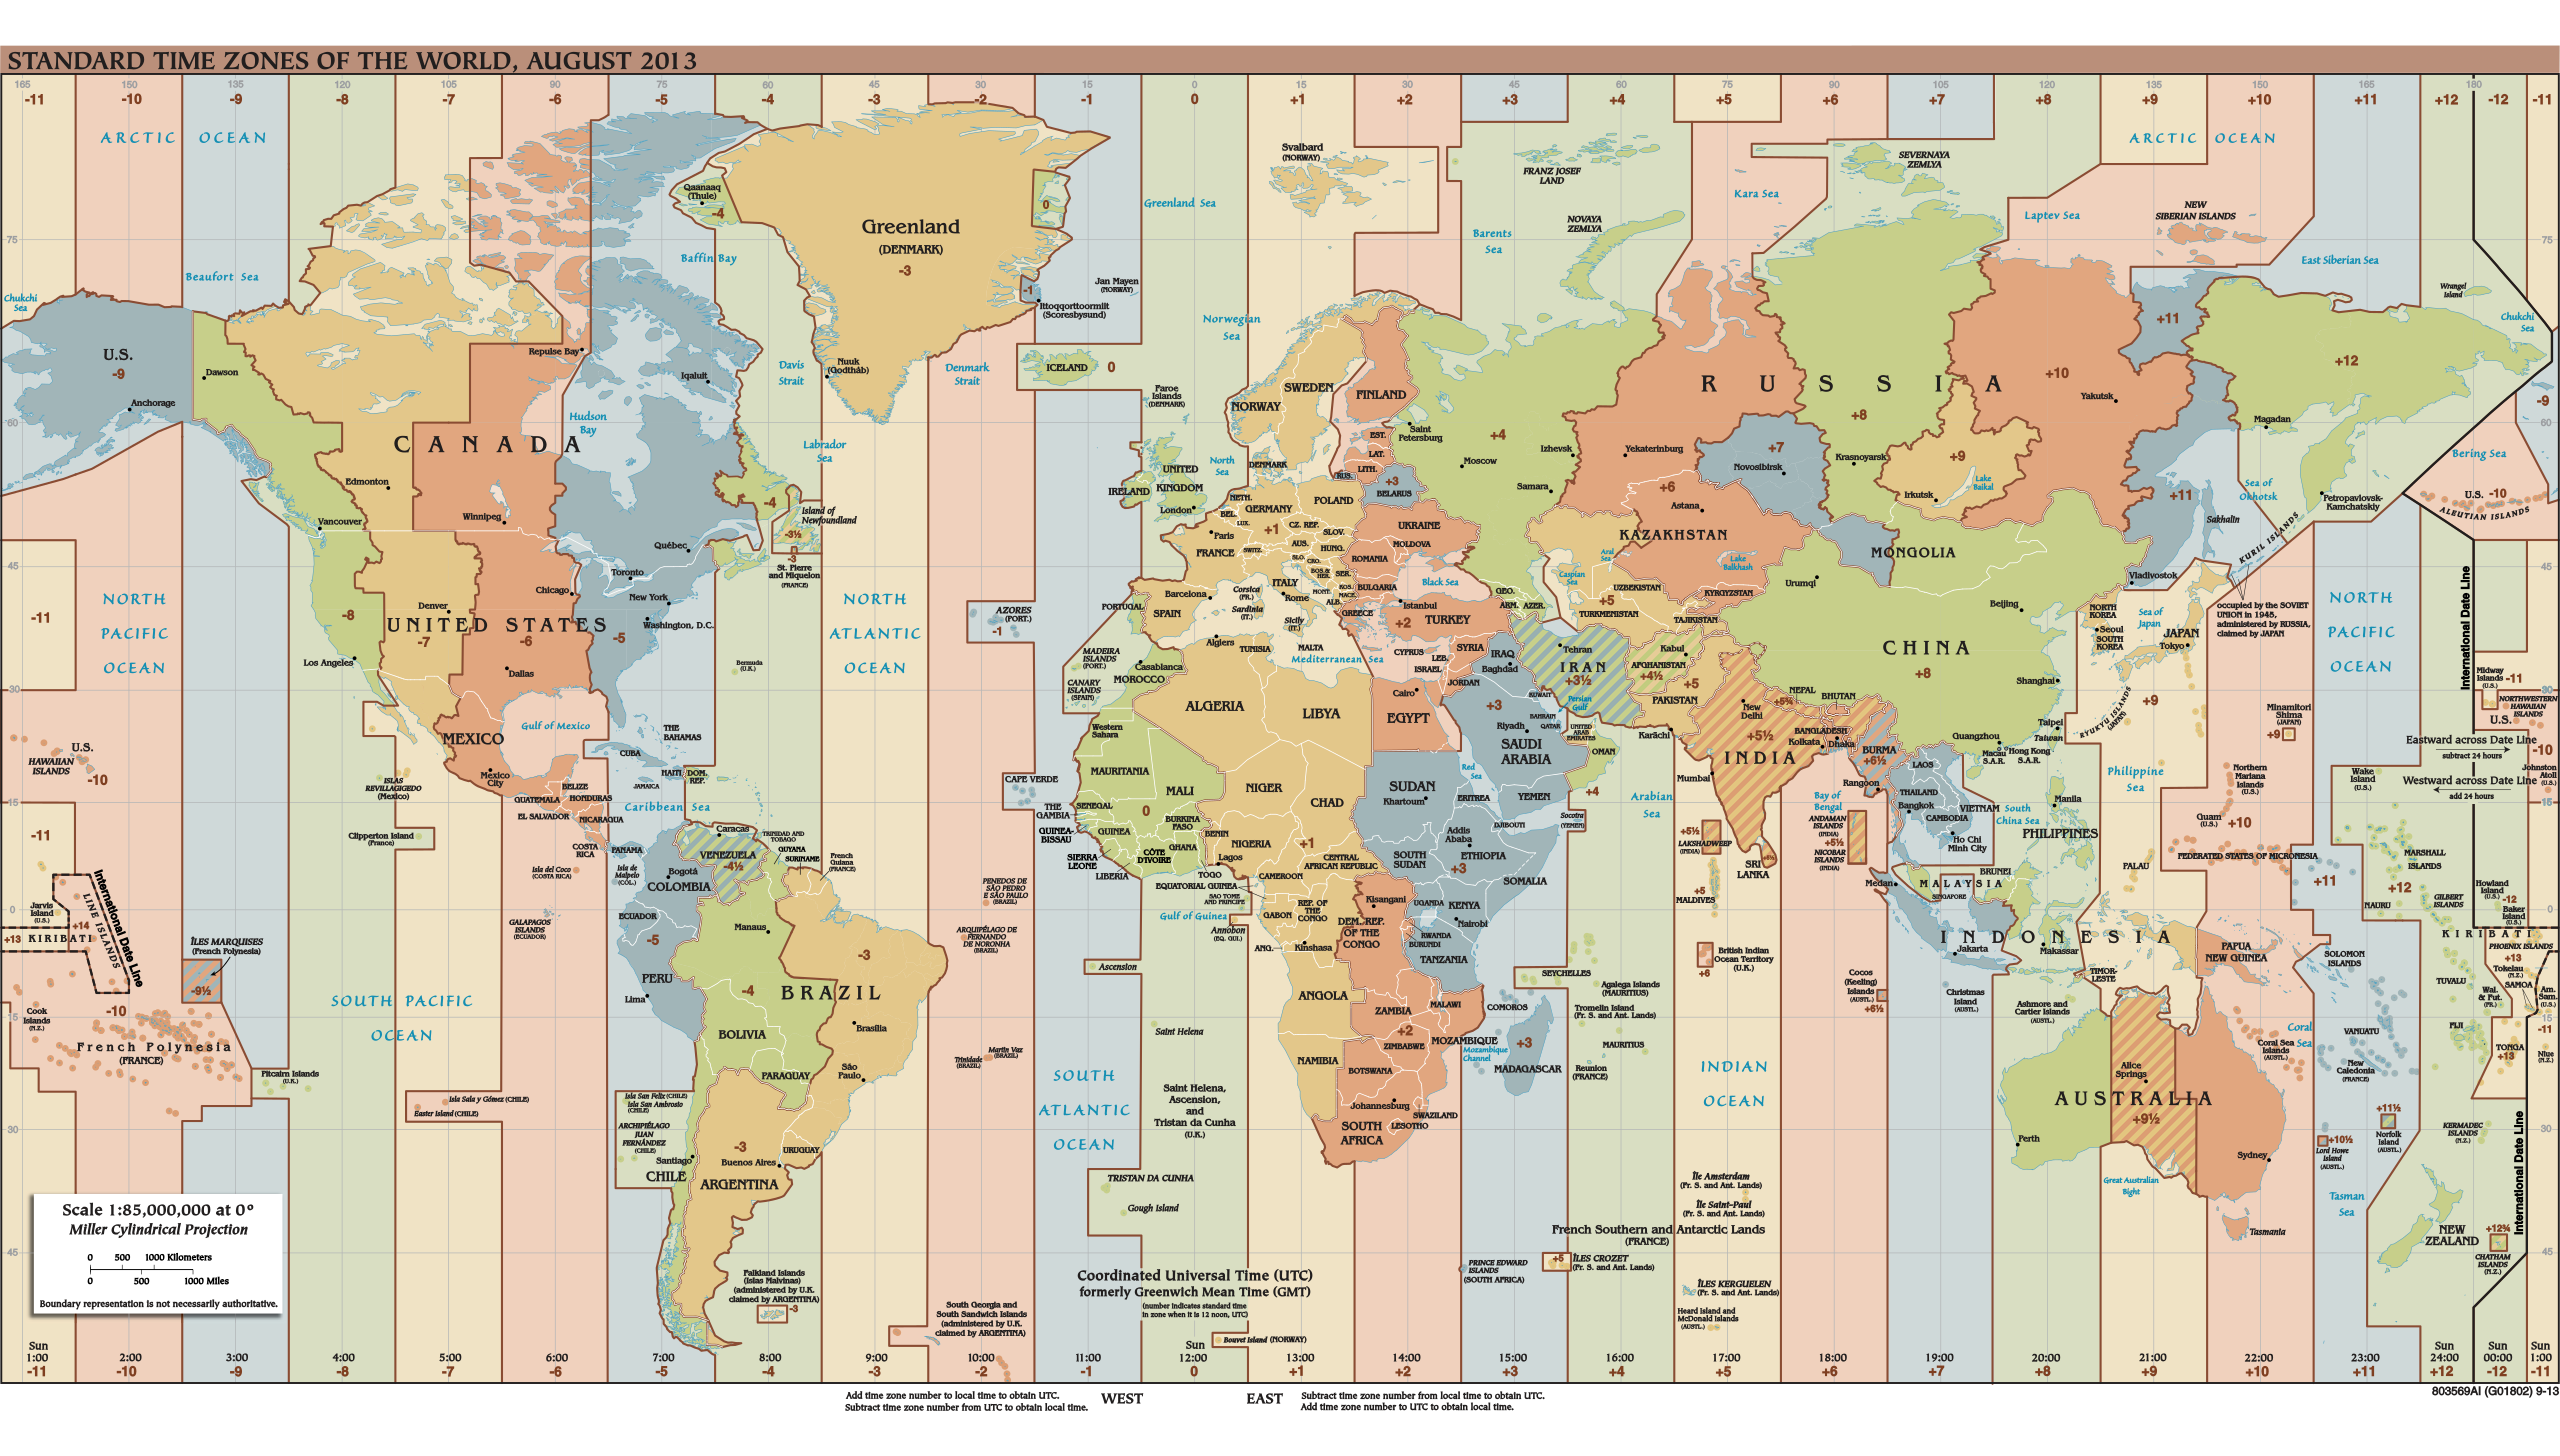 cd1295c7bf19b199538c98491e209a38_Standard_Time_Zones_of_the_World_(August_2013).png